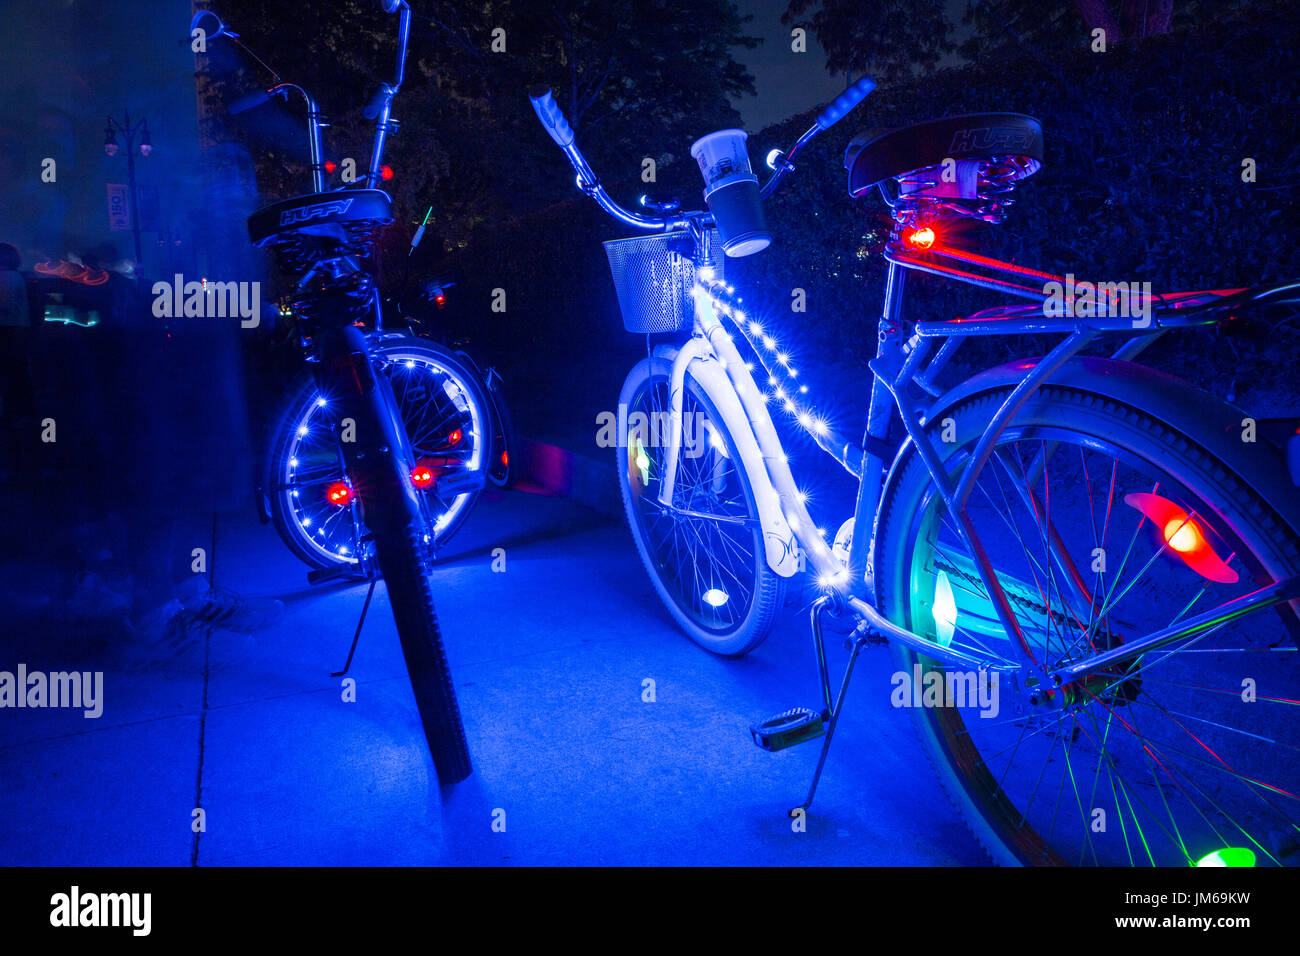 LED lights light up the night at the annual Detroit art festival called  Dlectricity Stock Photo - Alamy